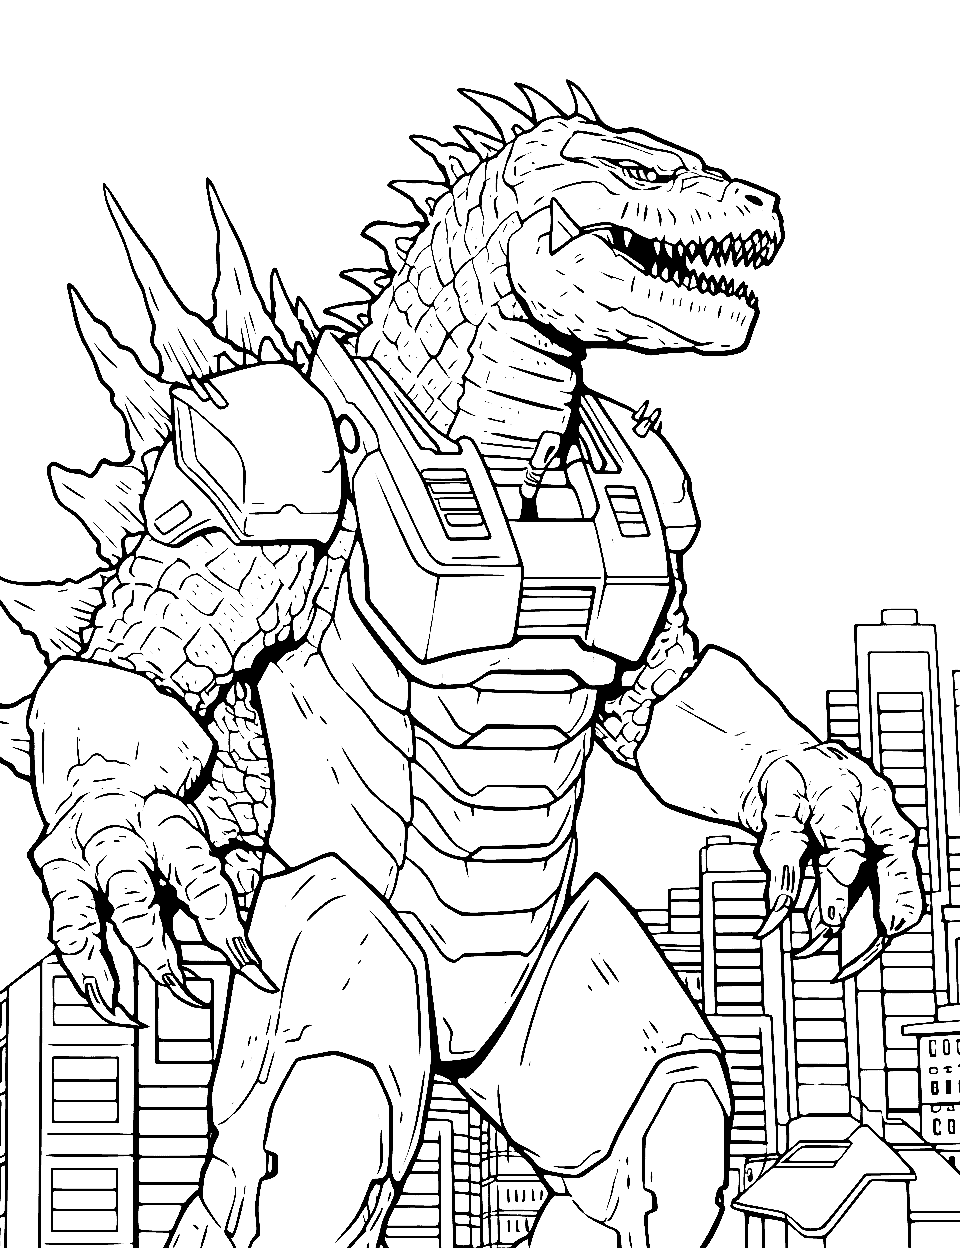 Mechagodzilla Standoff Coloring Page - The robotic counterpart of Godzilla, made entirely of metal with red glowing eyes.